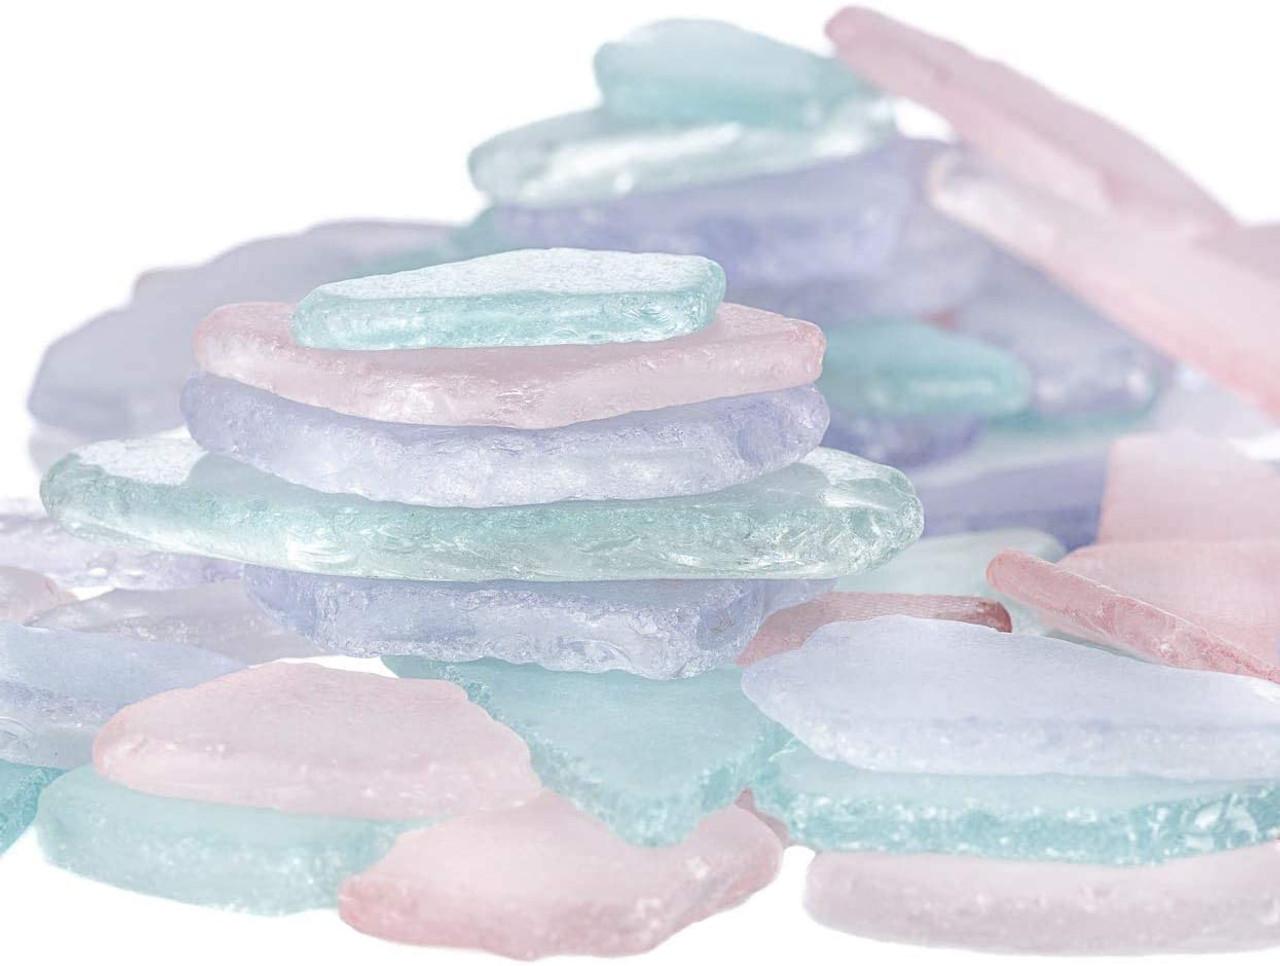 Tumbler Home Sea Glass for Crafts, Decor and Vase Filler. Frosted Beach  Glass in Bulk. 25oz Pink & Mint Seaglass Pieces